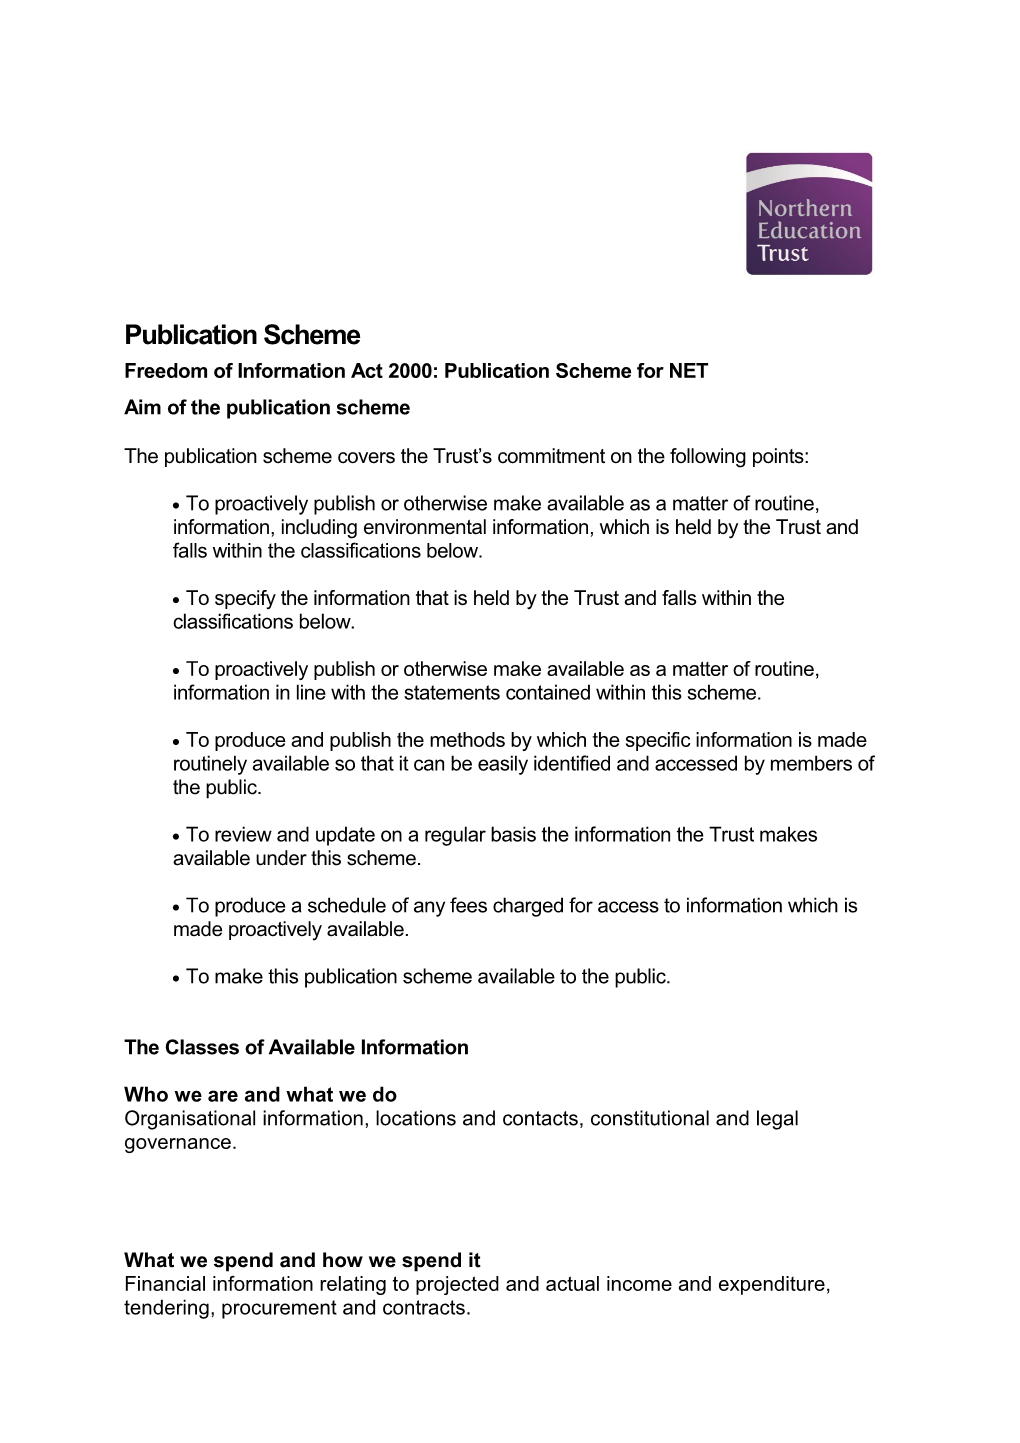 Freedom of Information Act 2000: Publication Scheme for NET